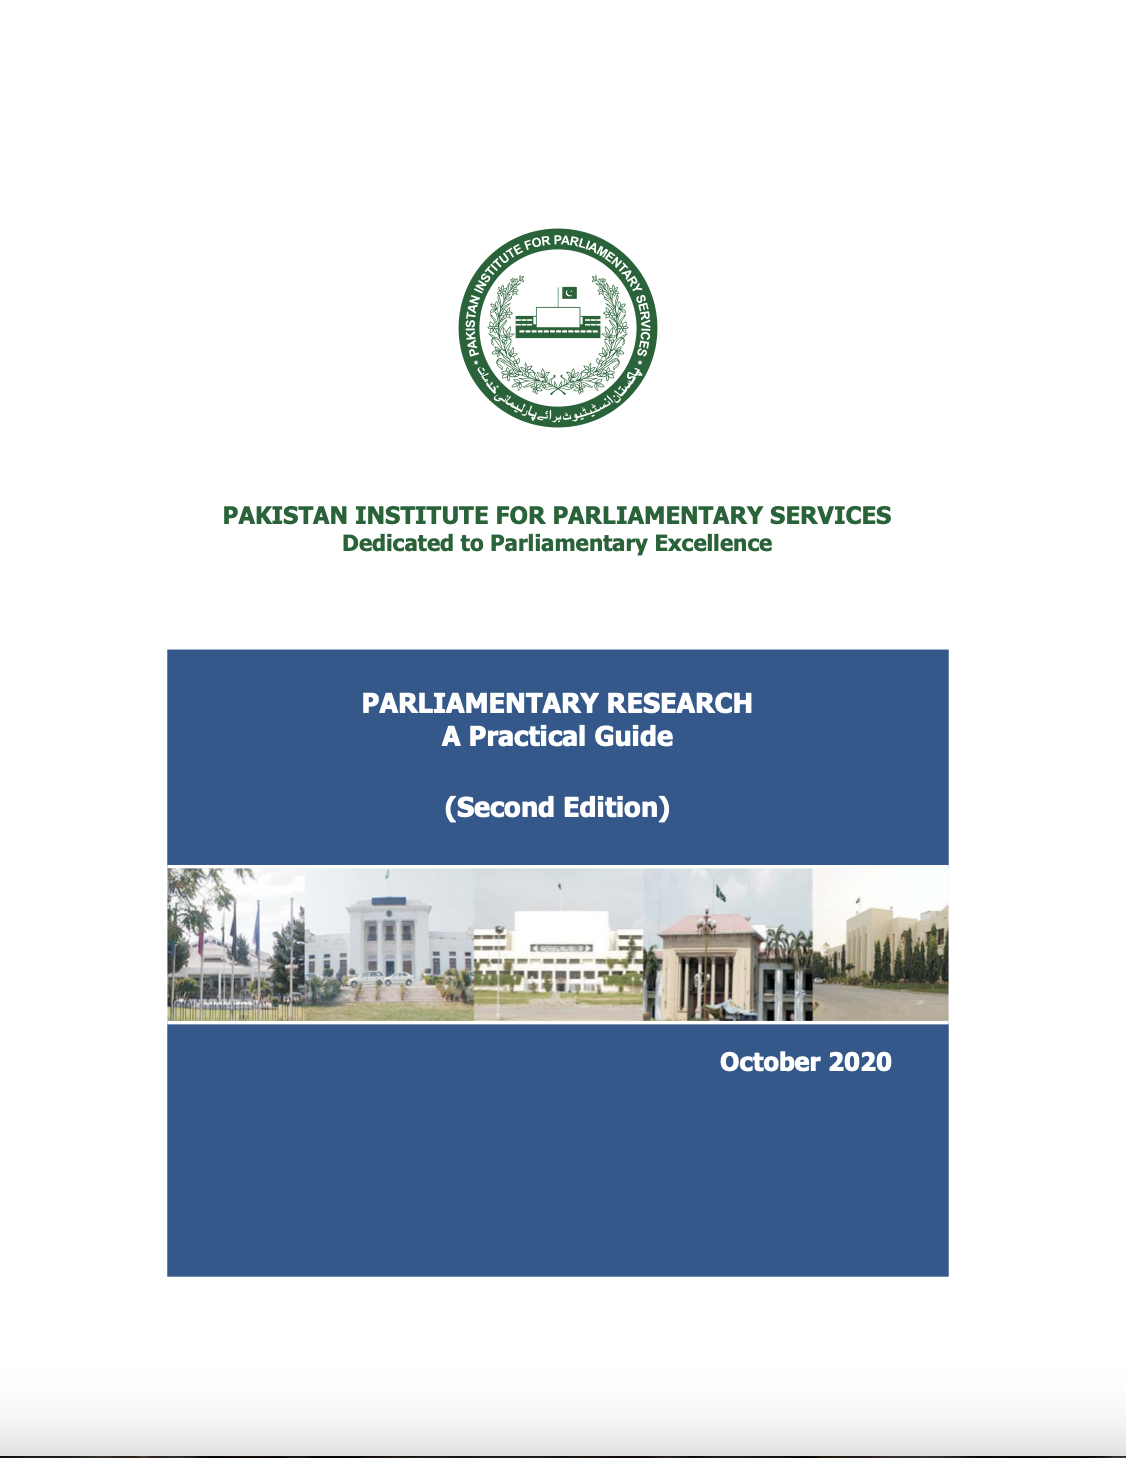 PARLIAMENTARY RESEARCH – A PRACTICAL GUIDE (SECOND EDITION) 2020